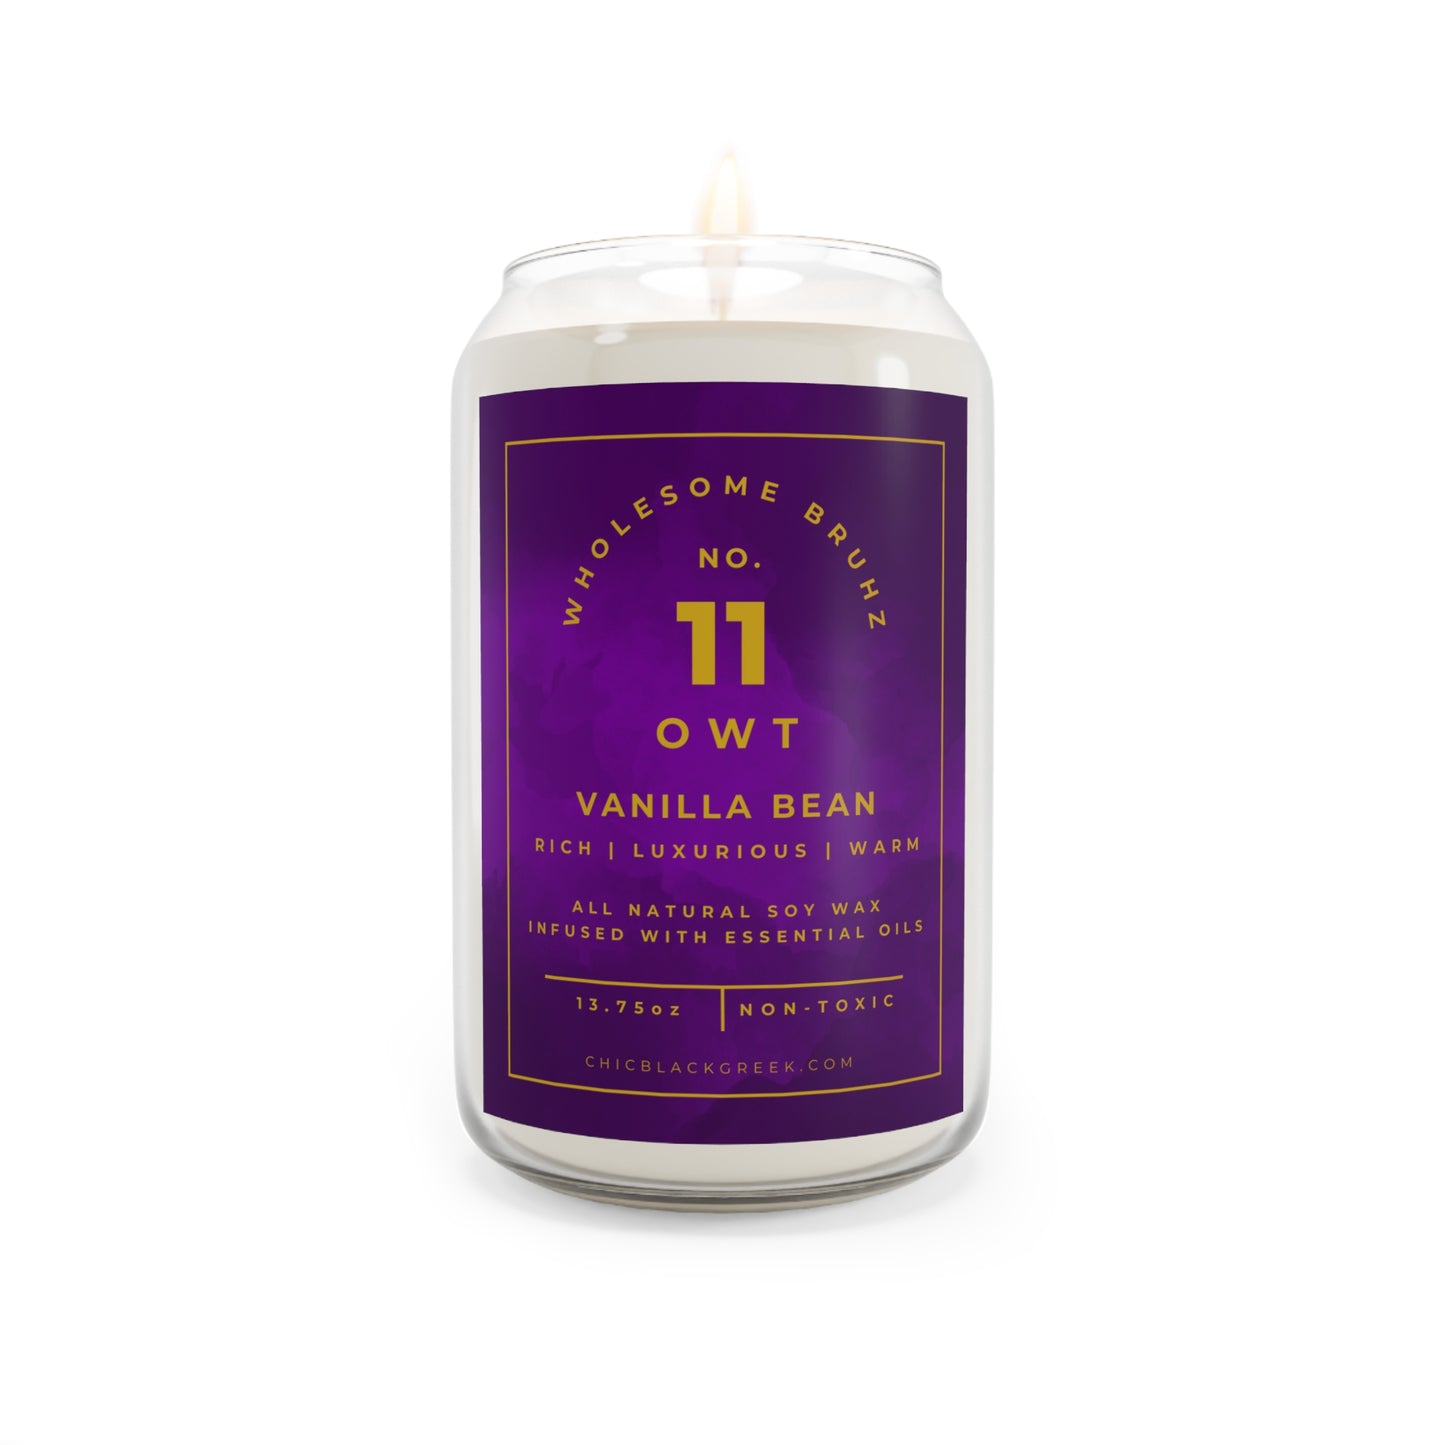 Large Wholesome Bruhz No. 11 Candle | Vanilla Bean